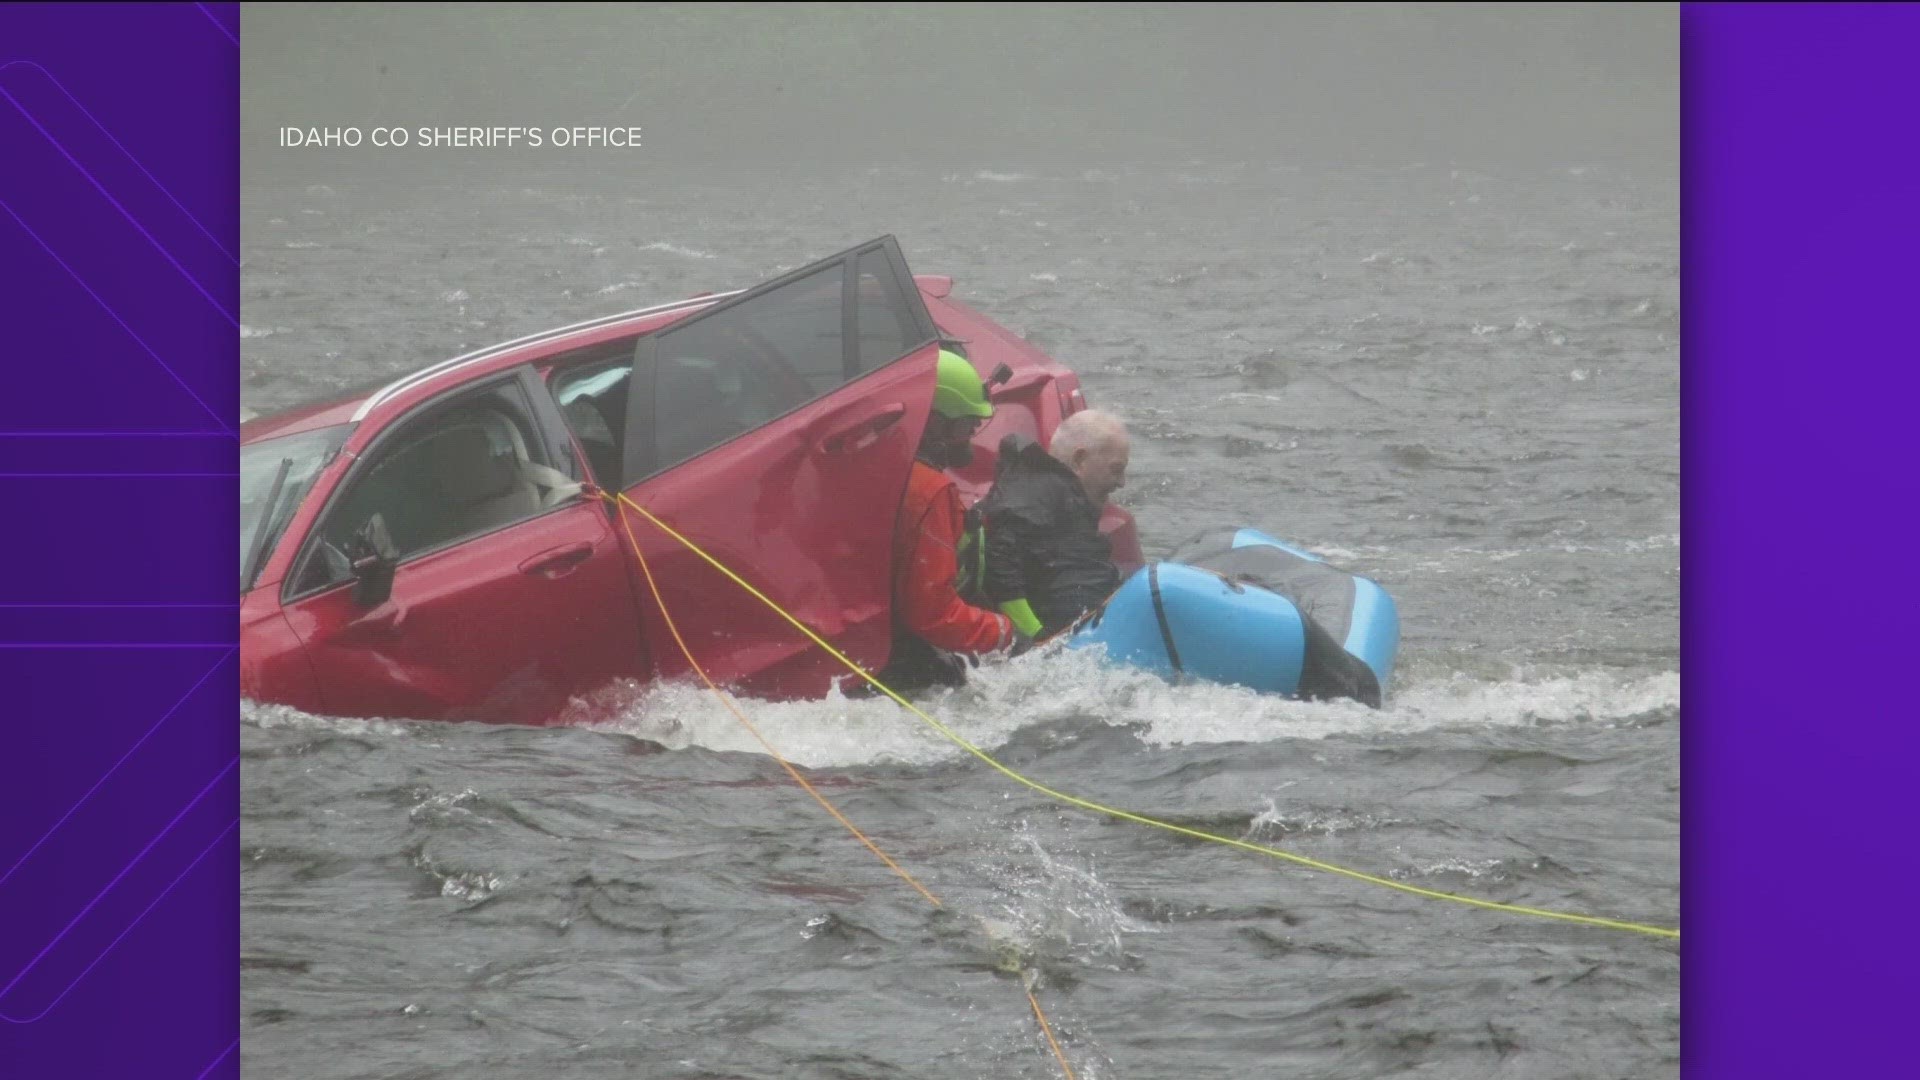 A firefighter with the US Forest Service used his own rafting equipment to make the rescue. The man was stuck in his vehicle roughly 50 feet from the river bank.